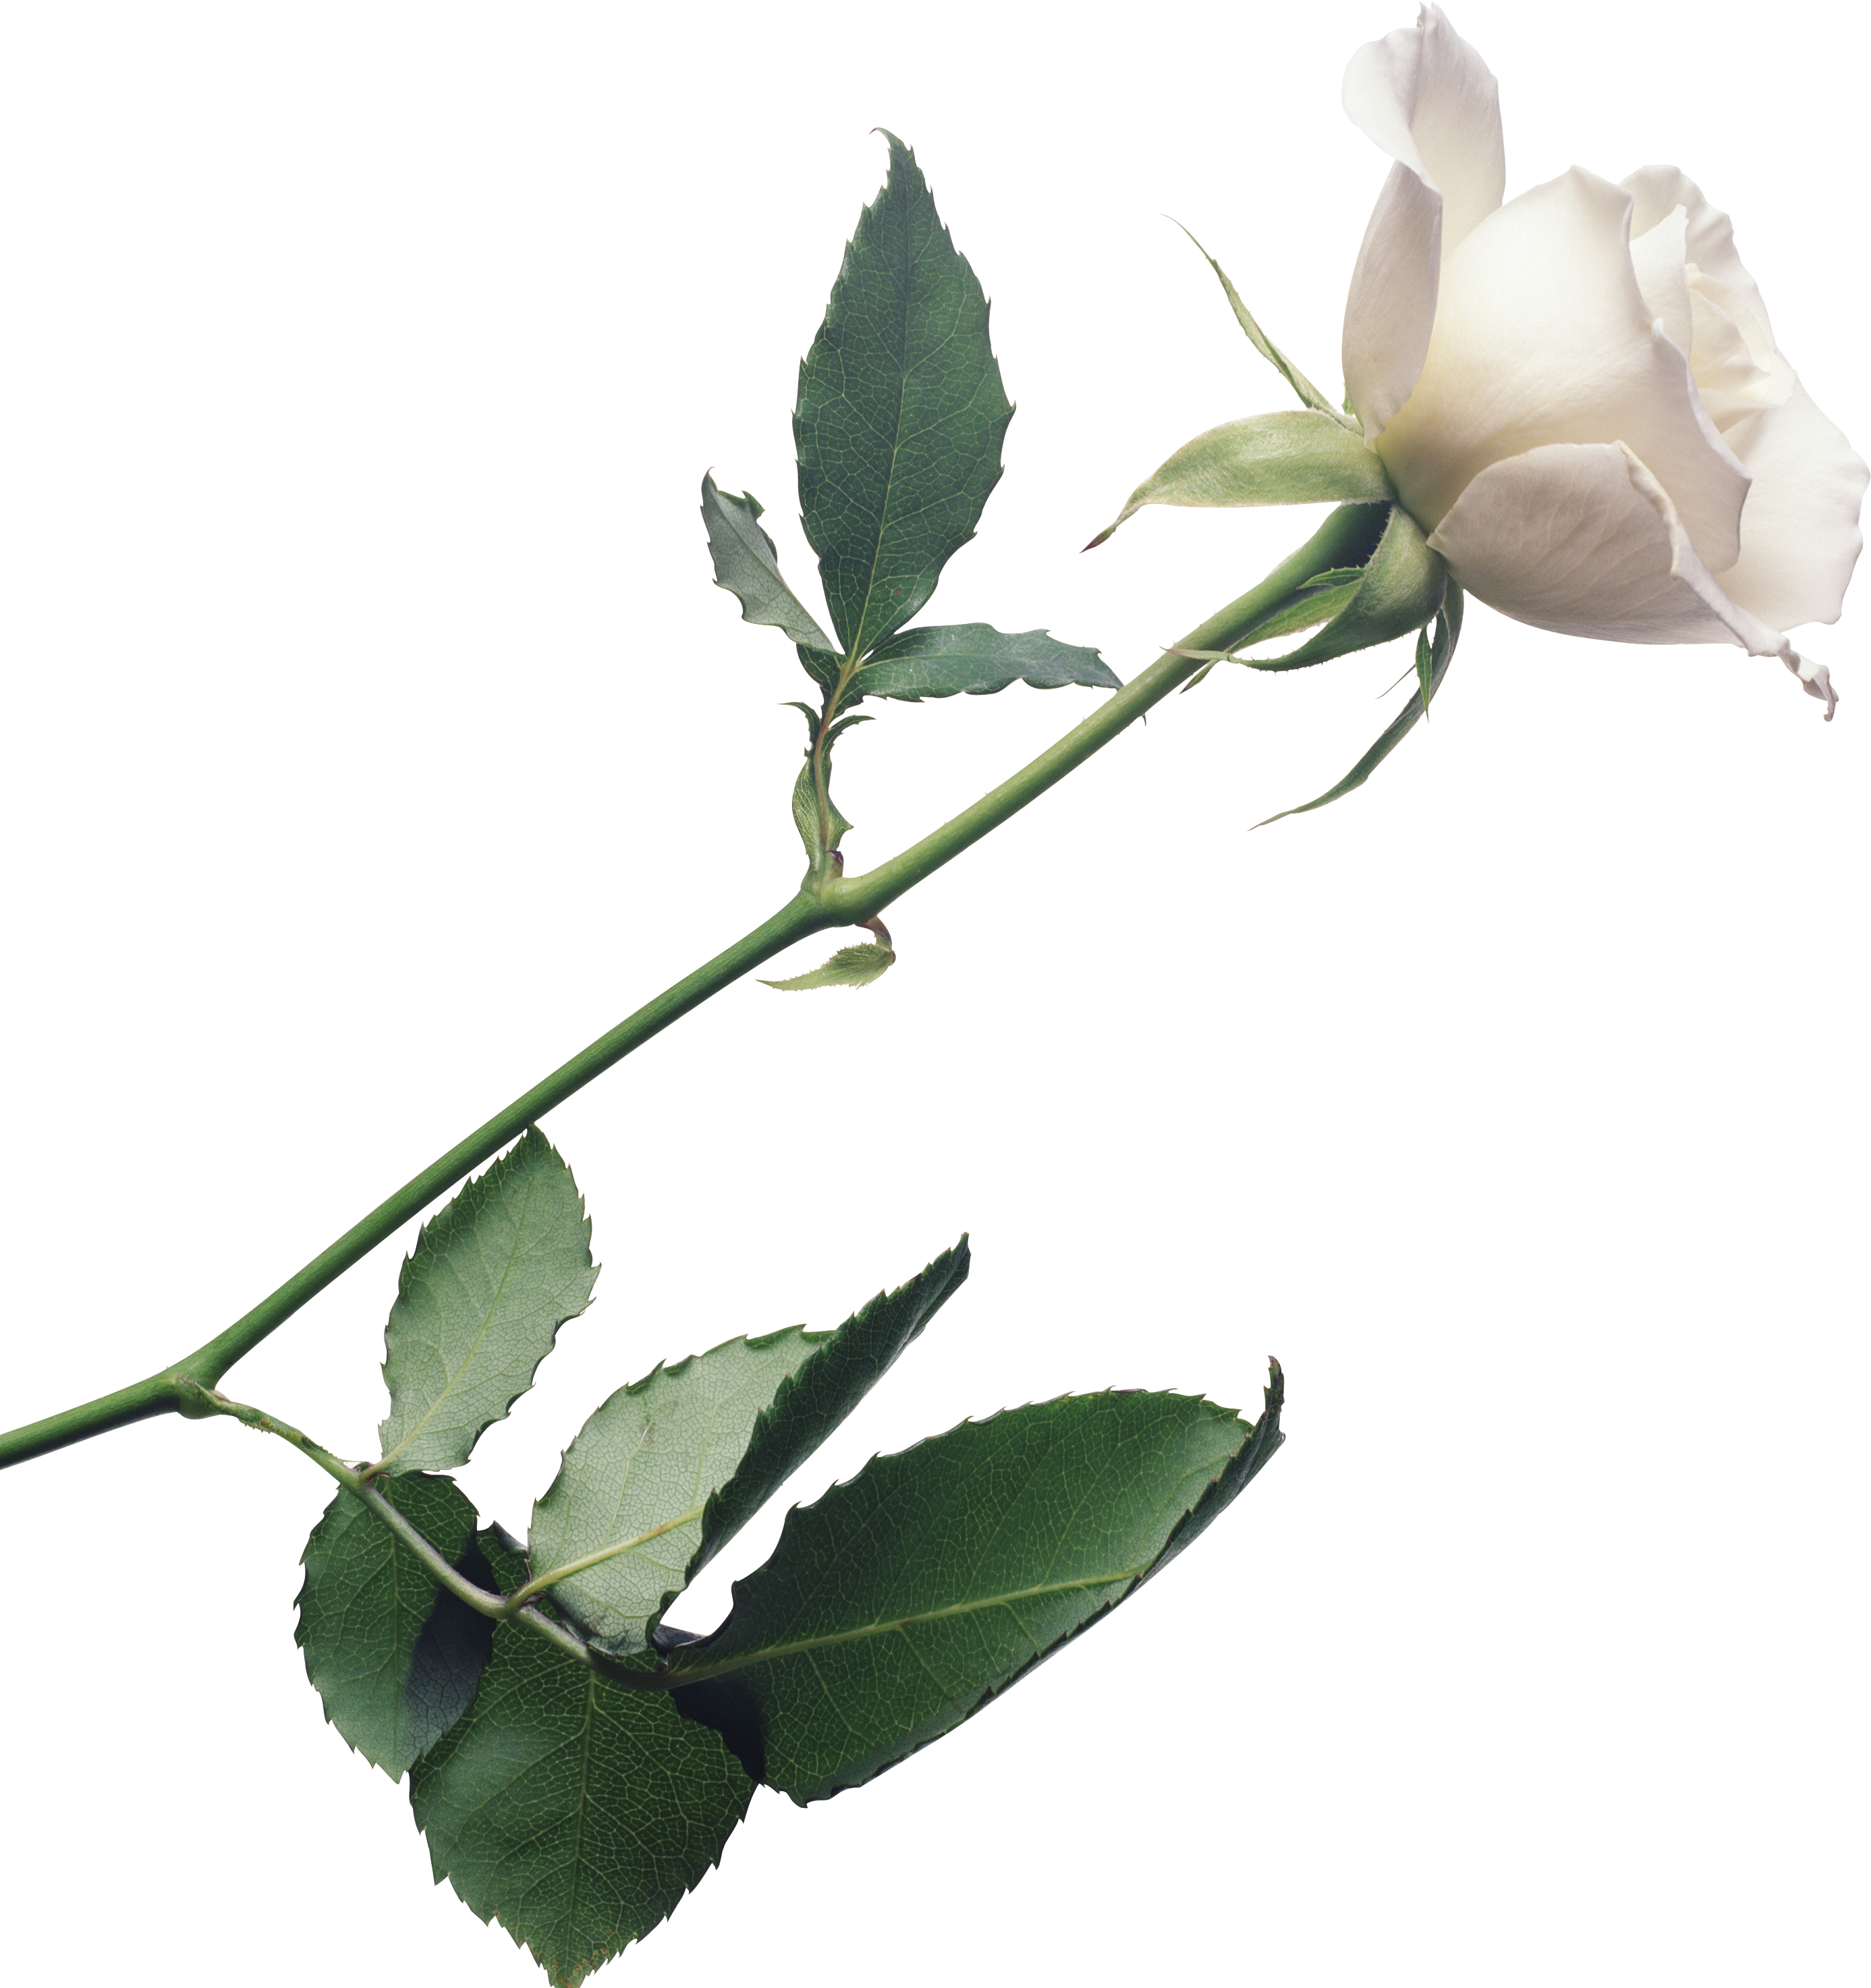 White Rose Png Image, Flower White Rose Png Picture - White Roses, Transparent background PNG HD thumbnail